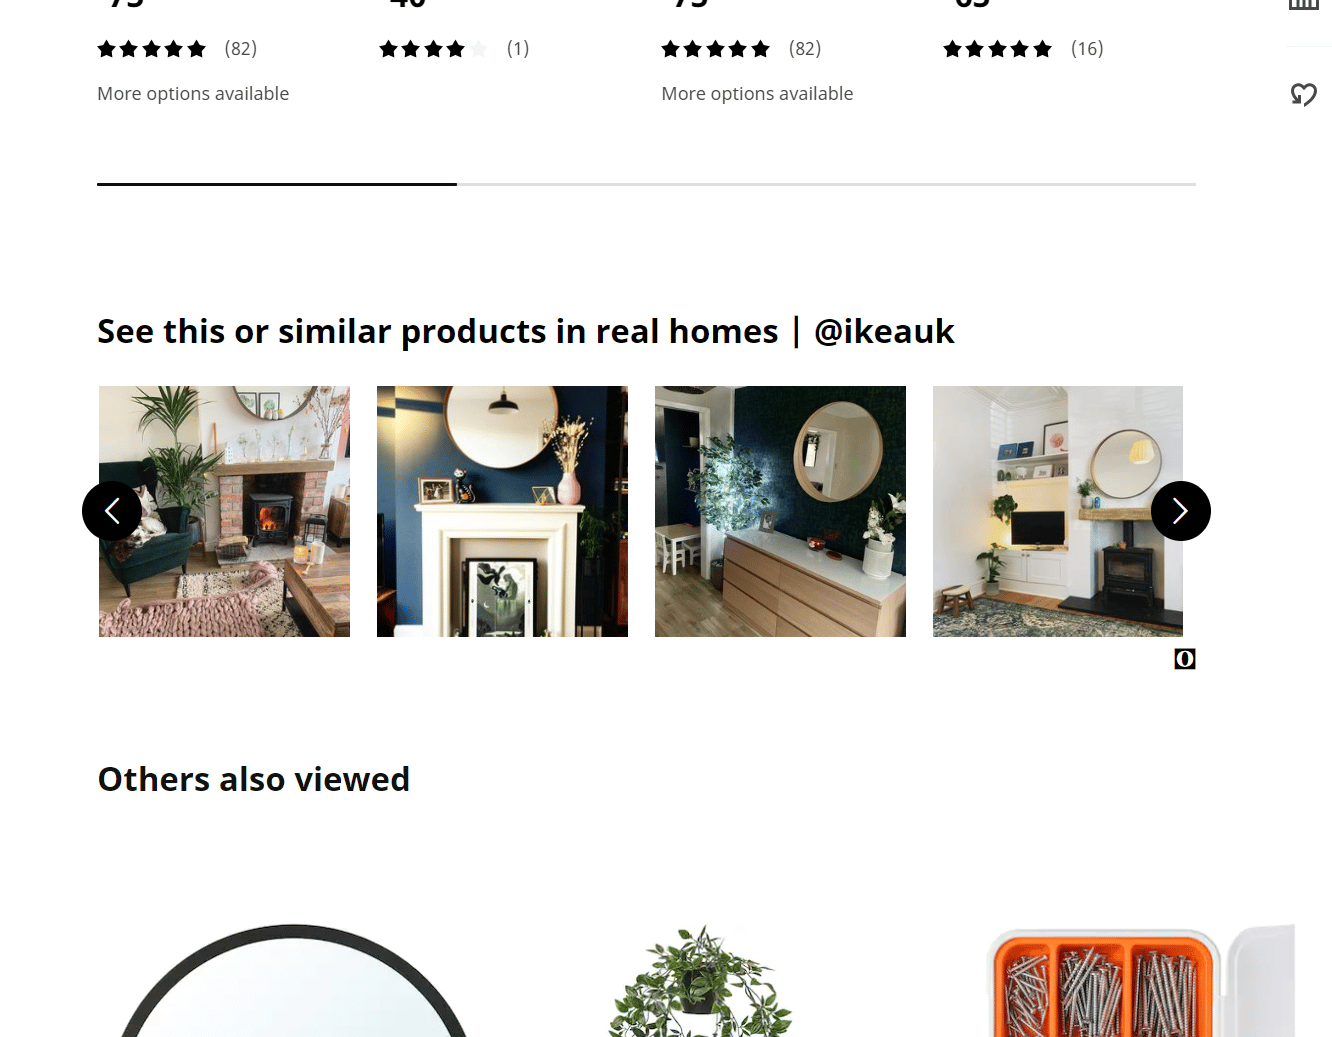 Ikea product page using user-generated content as a creative marketing strategy.